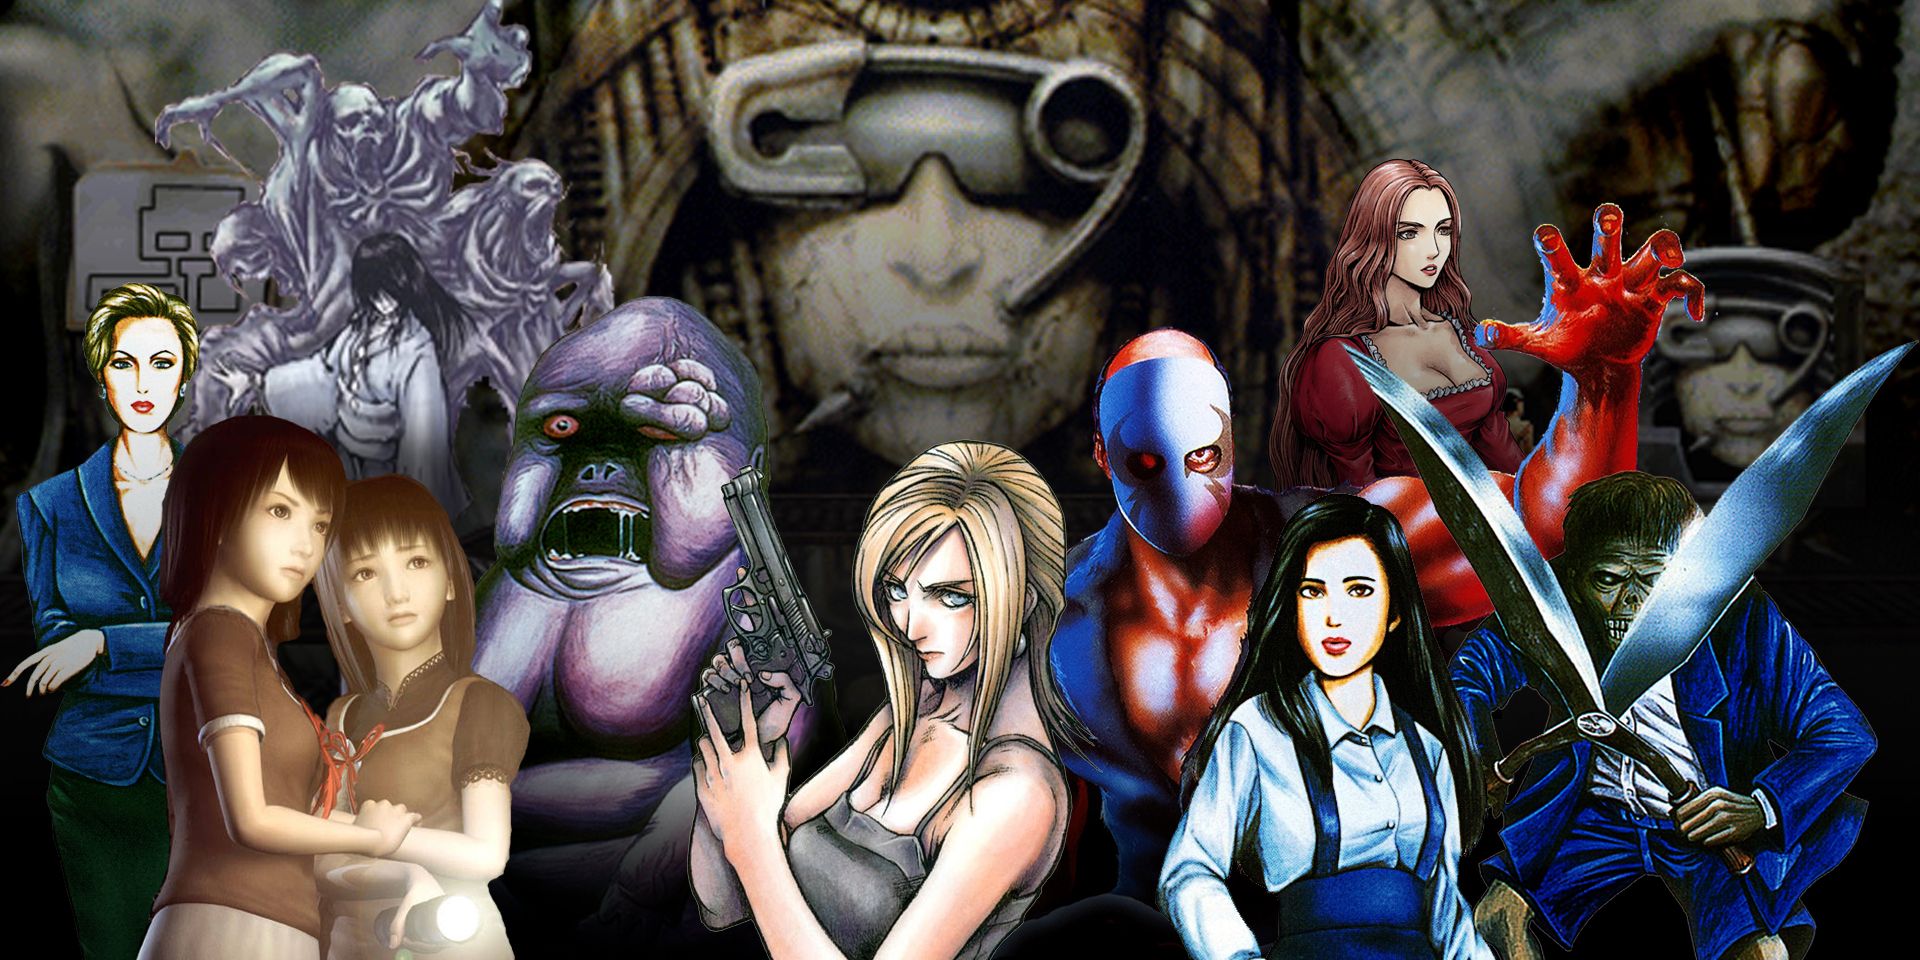 A collection of various horror game characters.